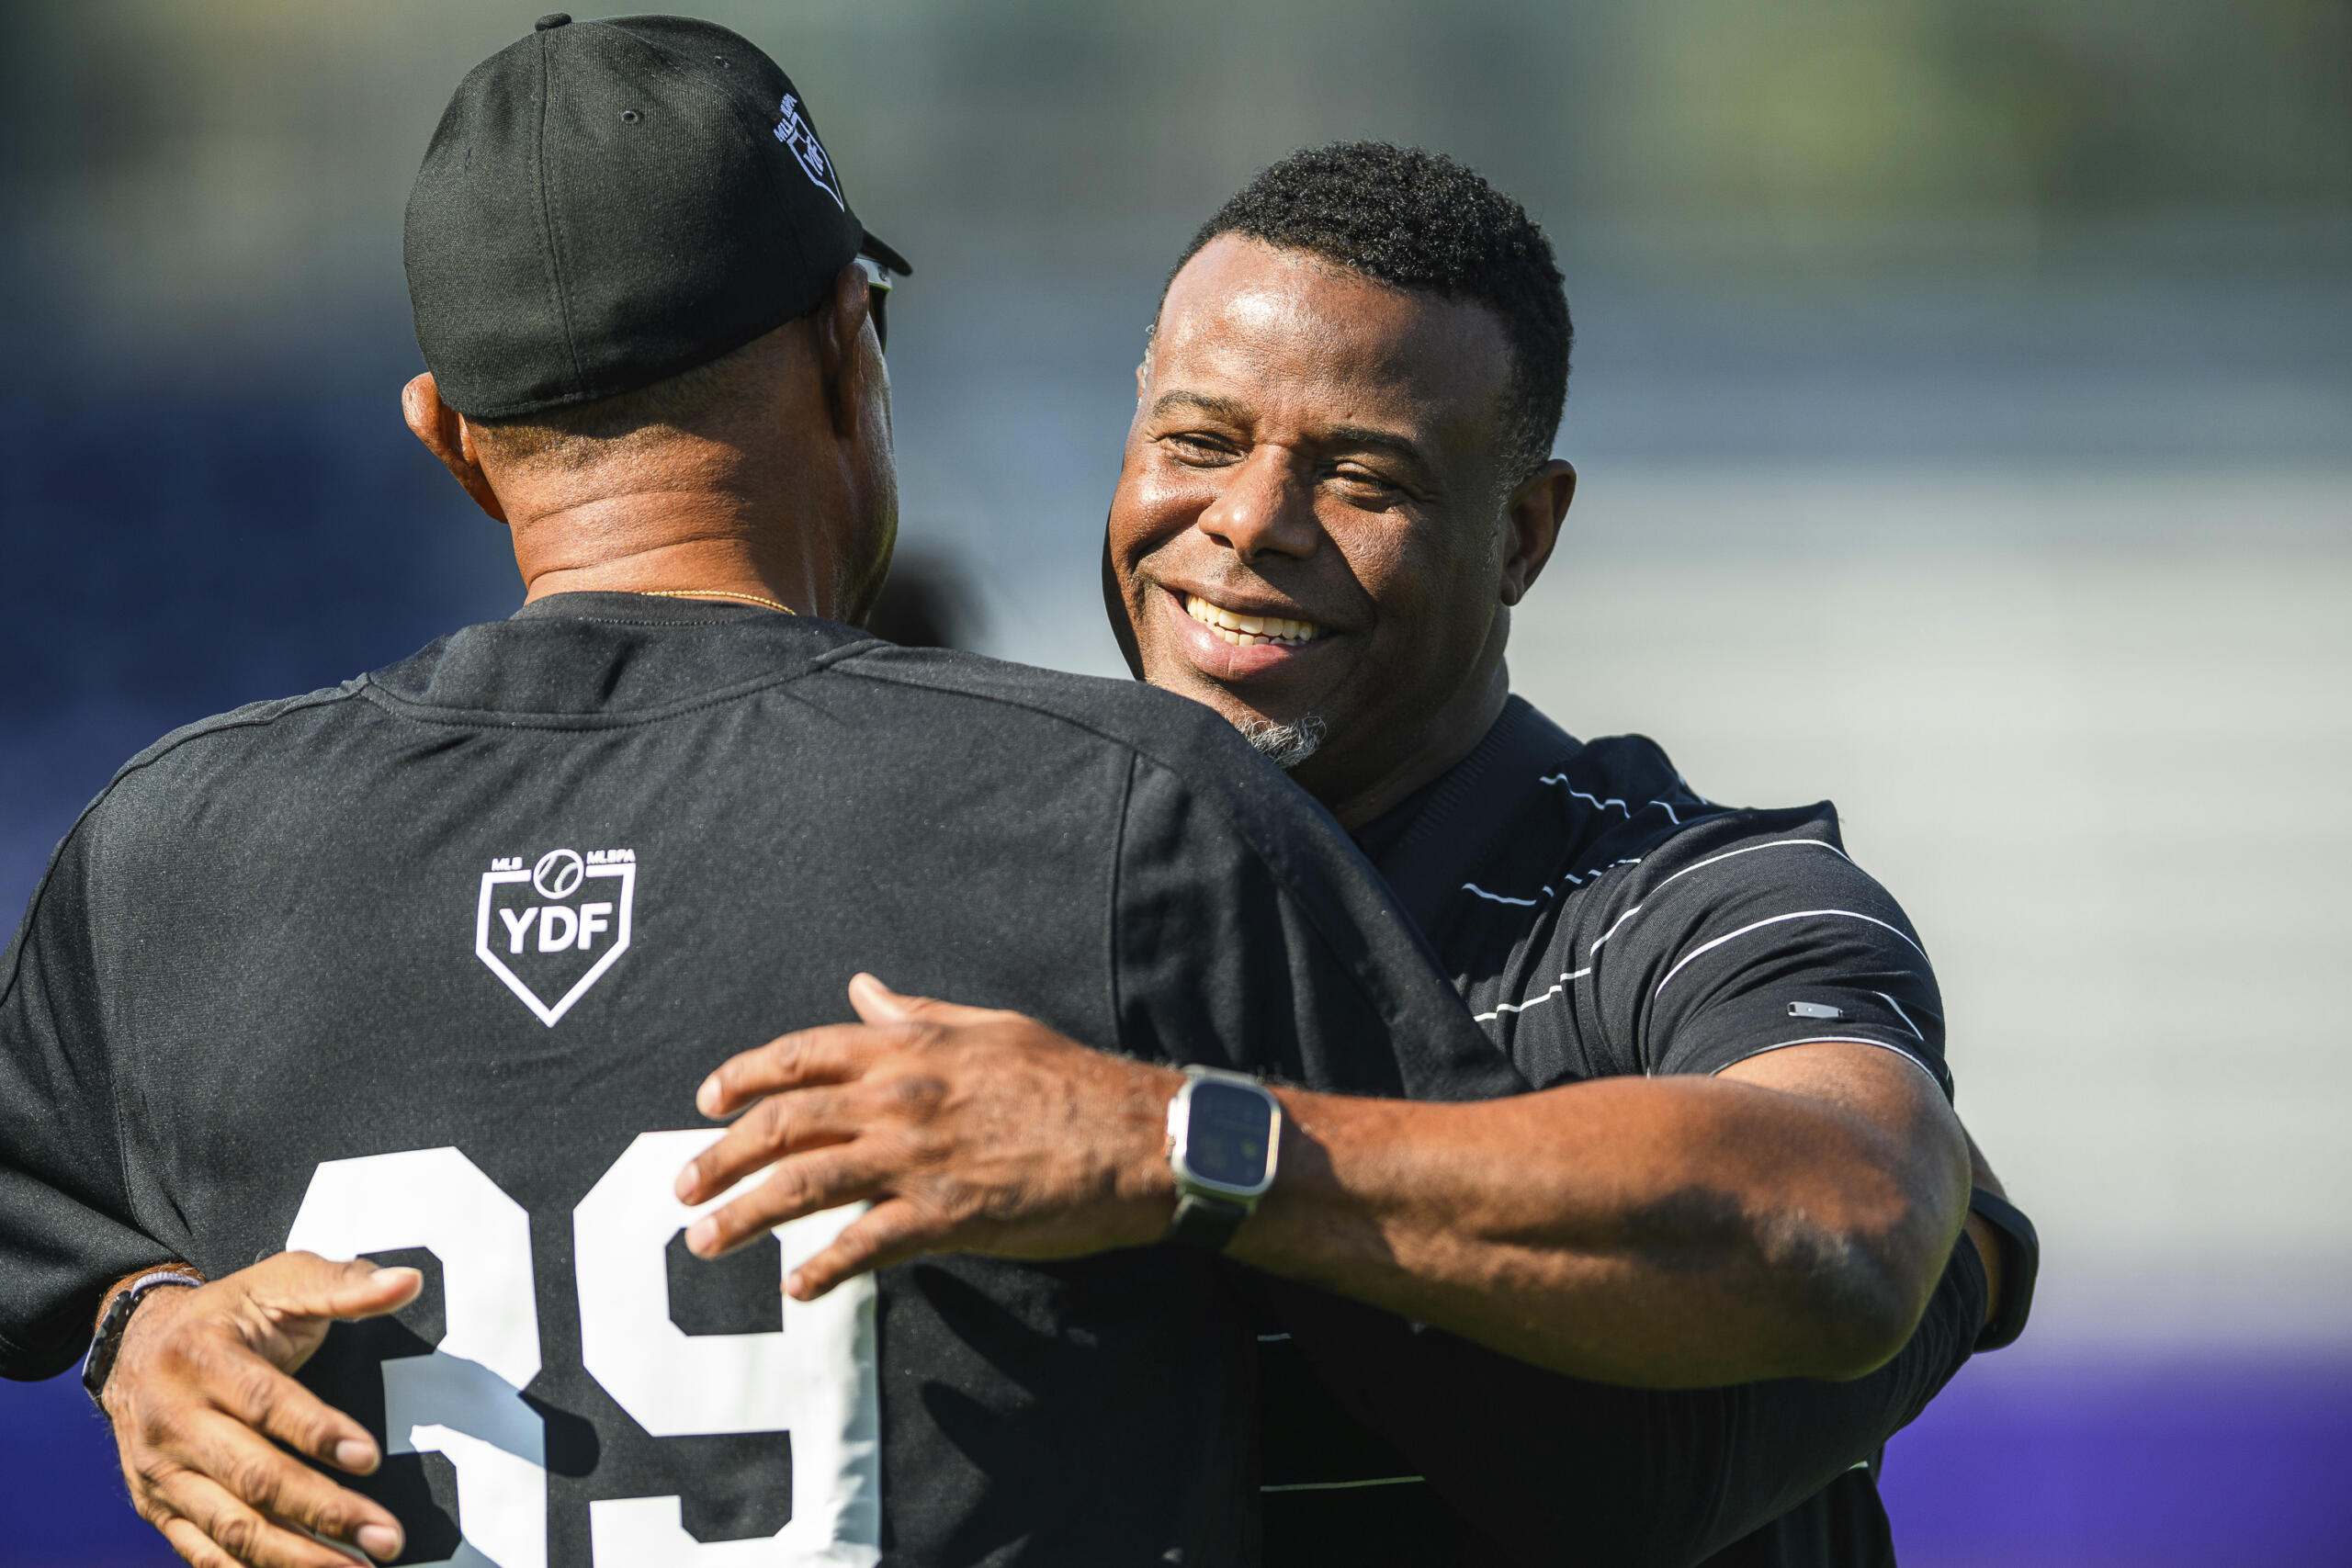 MLB Hall of Fame player Ken Griffey Jr. embraces a member of the coaching staff during a workout session the day before the HBCU Swingman Classic during the 2023 All Star Week, Thursday, July 6, 2023, in Seattle.